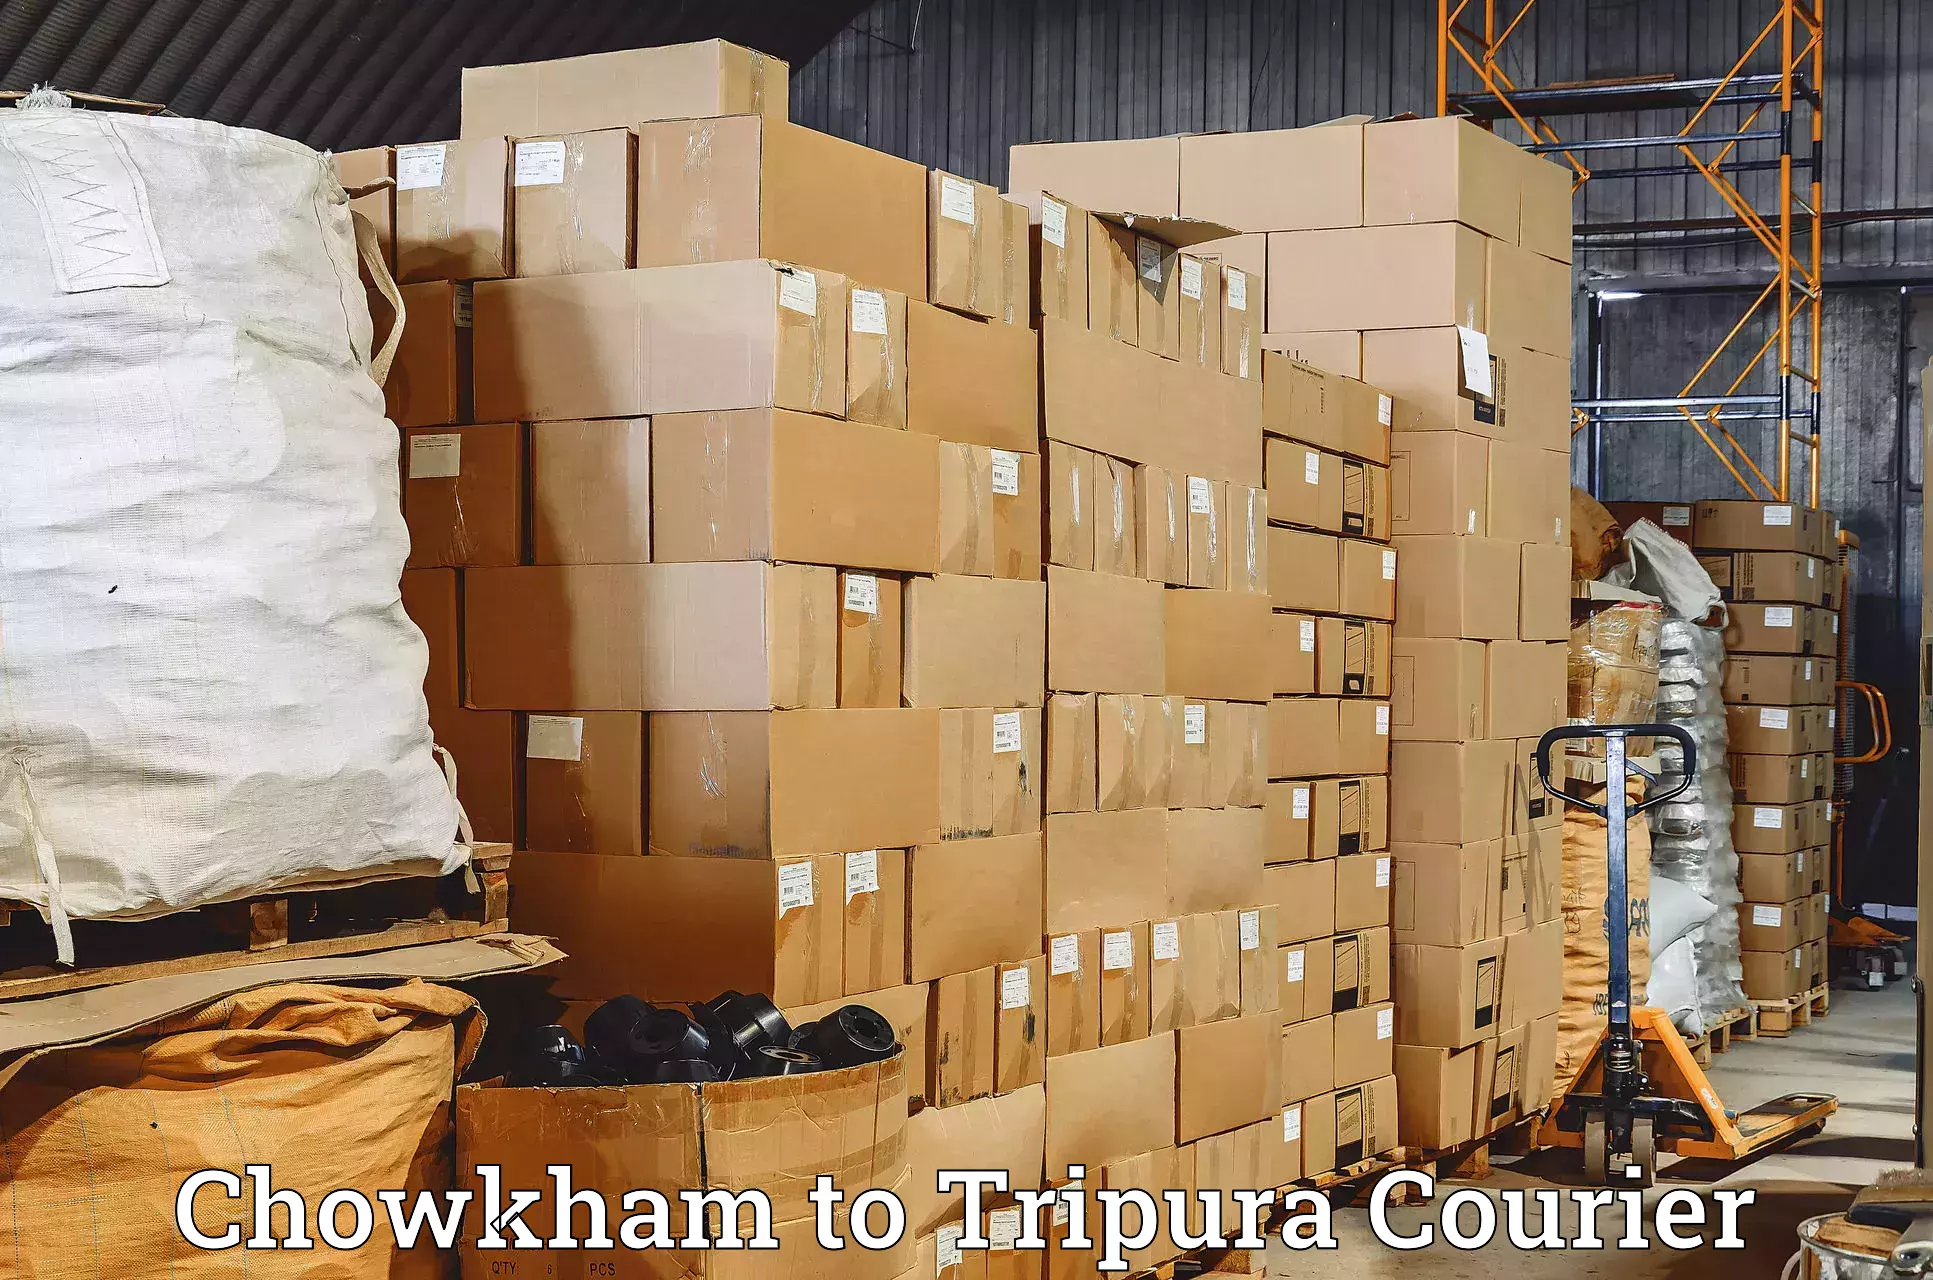 Courier service comparison in Chowkham to Agartala